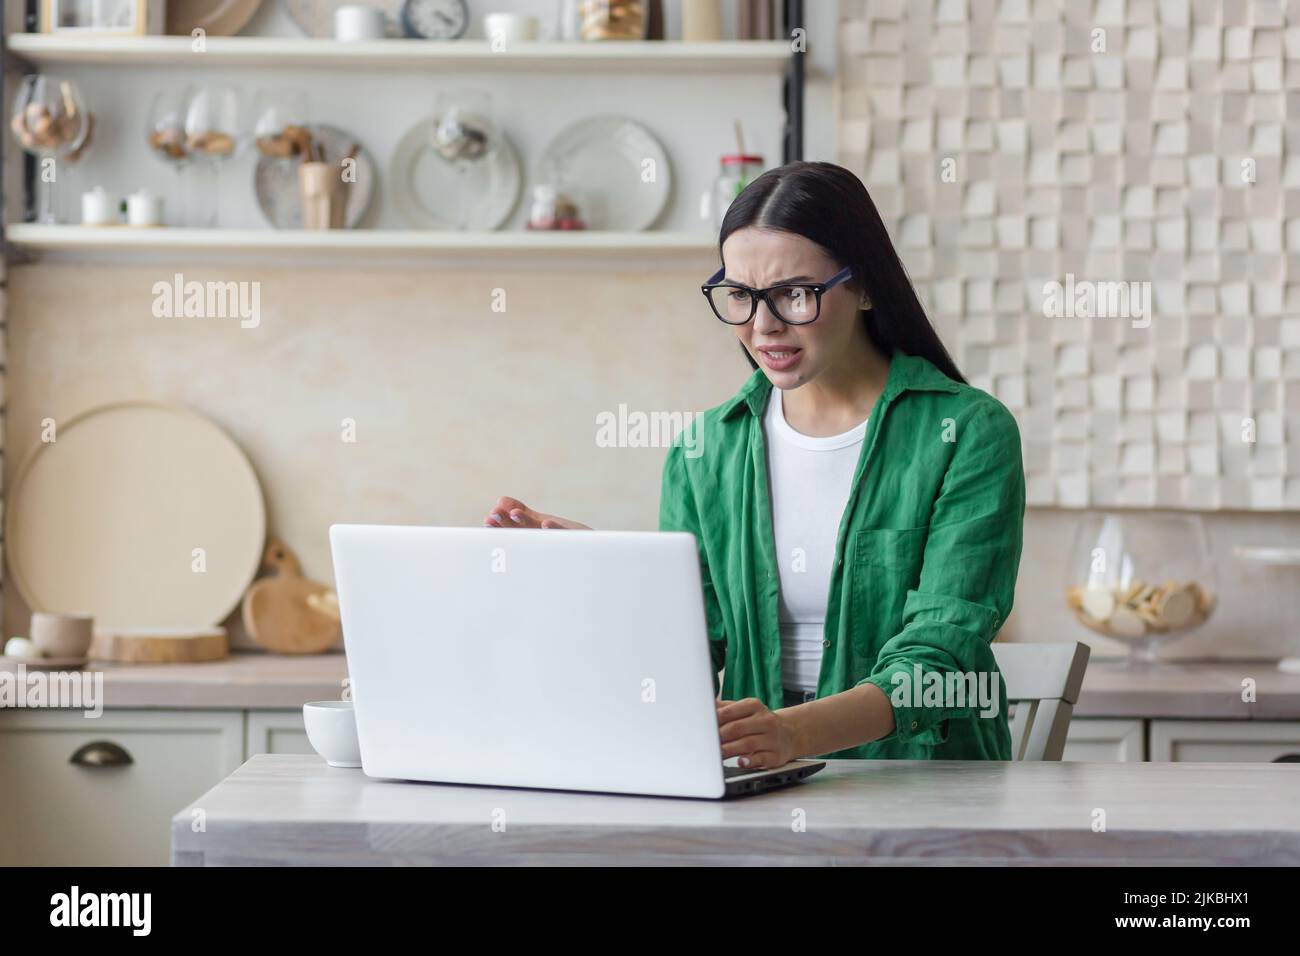 remote job, technology and people concept - tired or stressed young woman with laptop computer working at home office Stock Photo